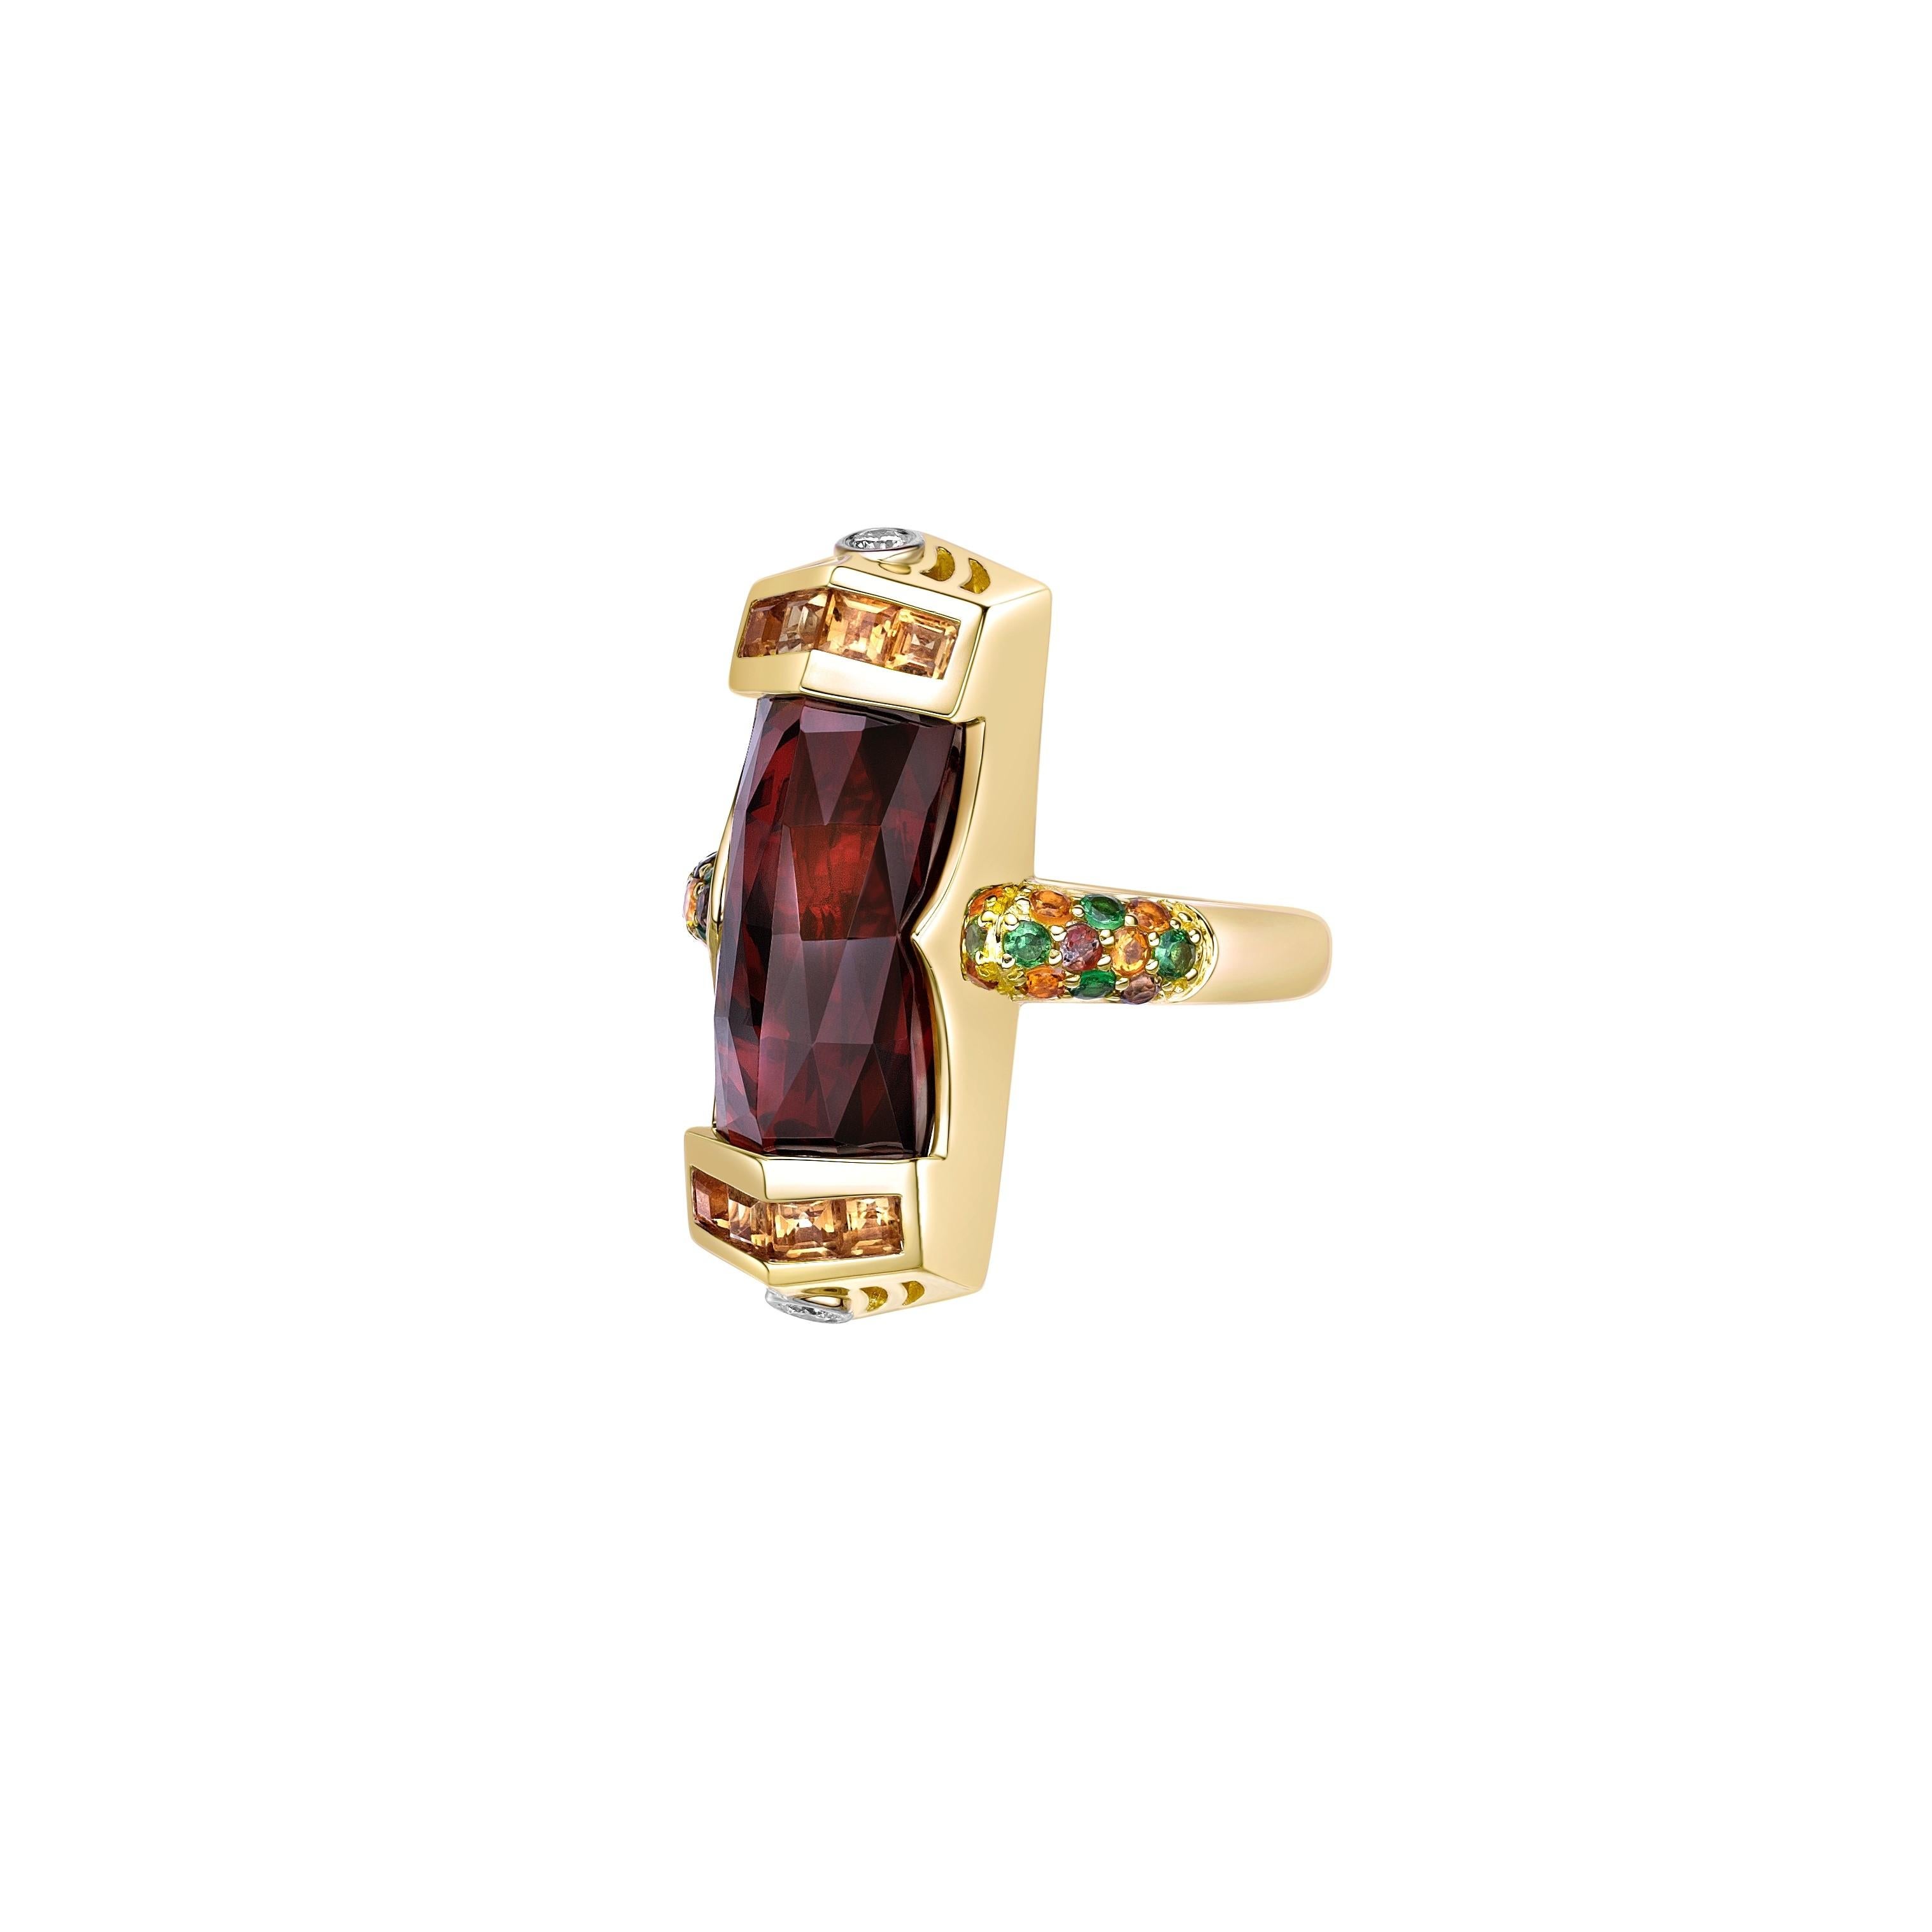 Baguette Cut 9.25 Carat Garnet Cocktail Ring in 18KYG with Multi Gemstone and Diamond. For Sale